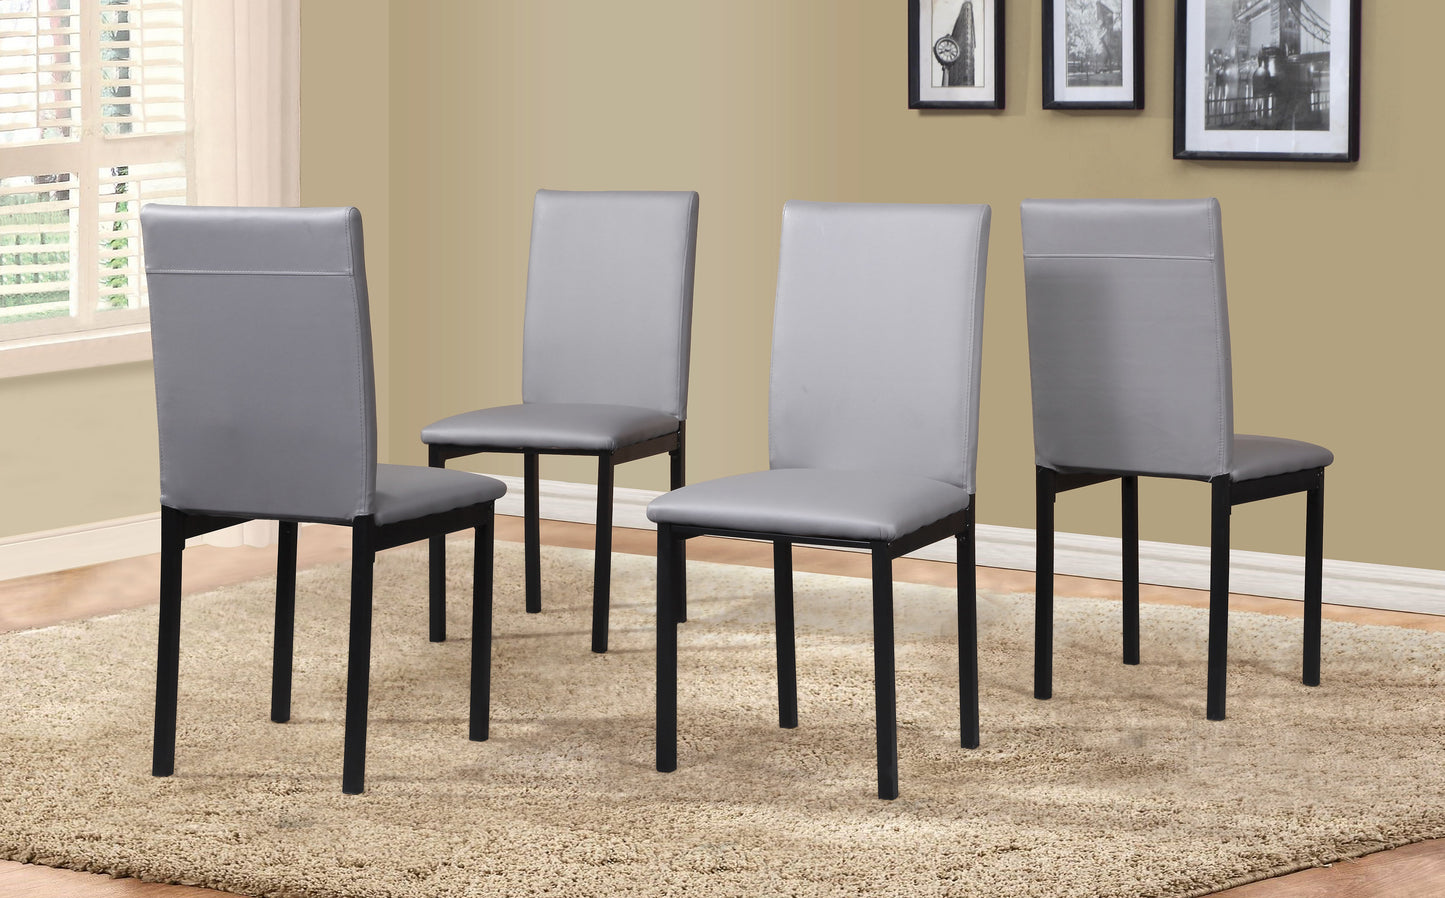 Noyes Faux Leather Seat Metal Frame Gray Dining Chairs , Set of 4